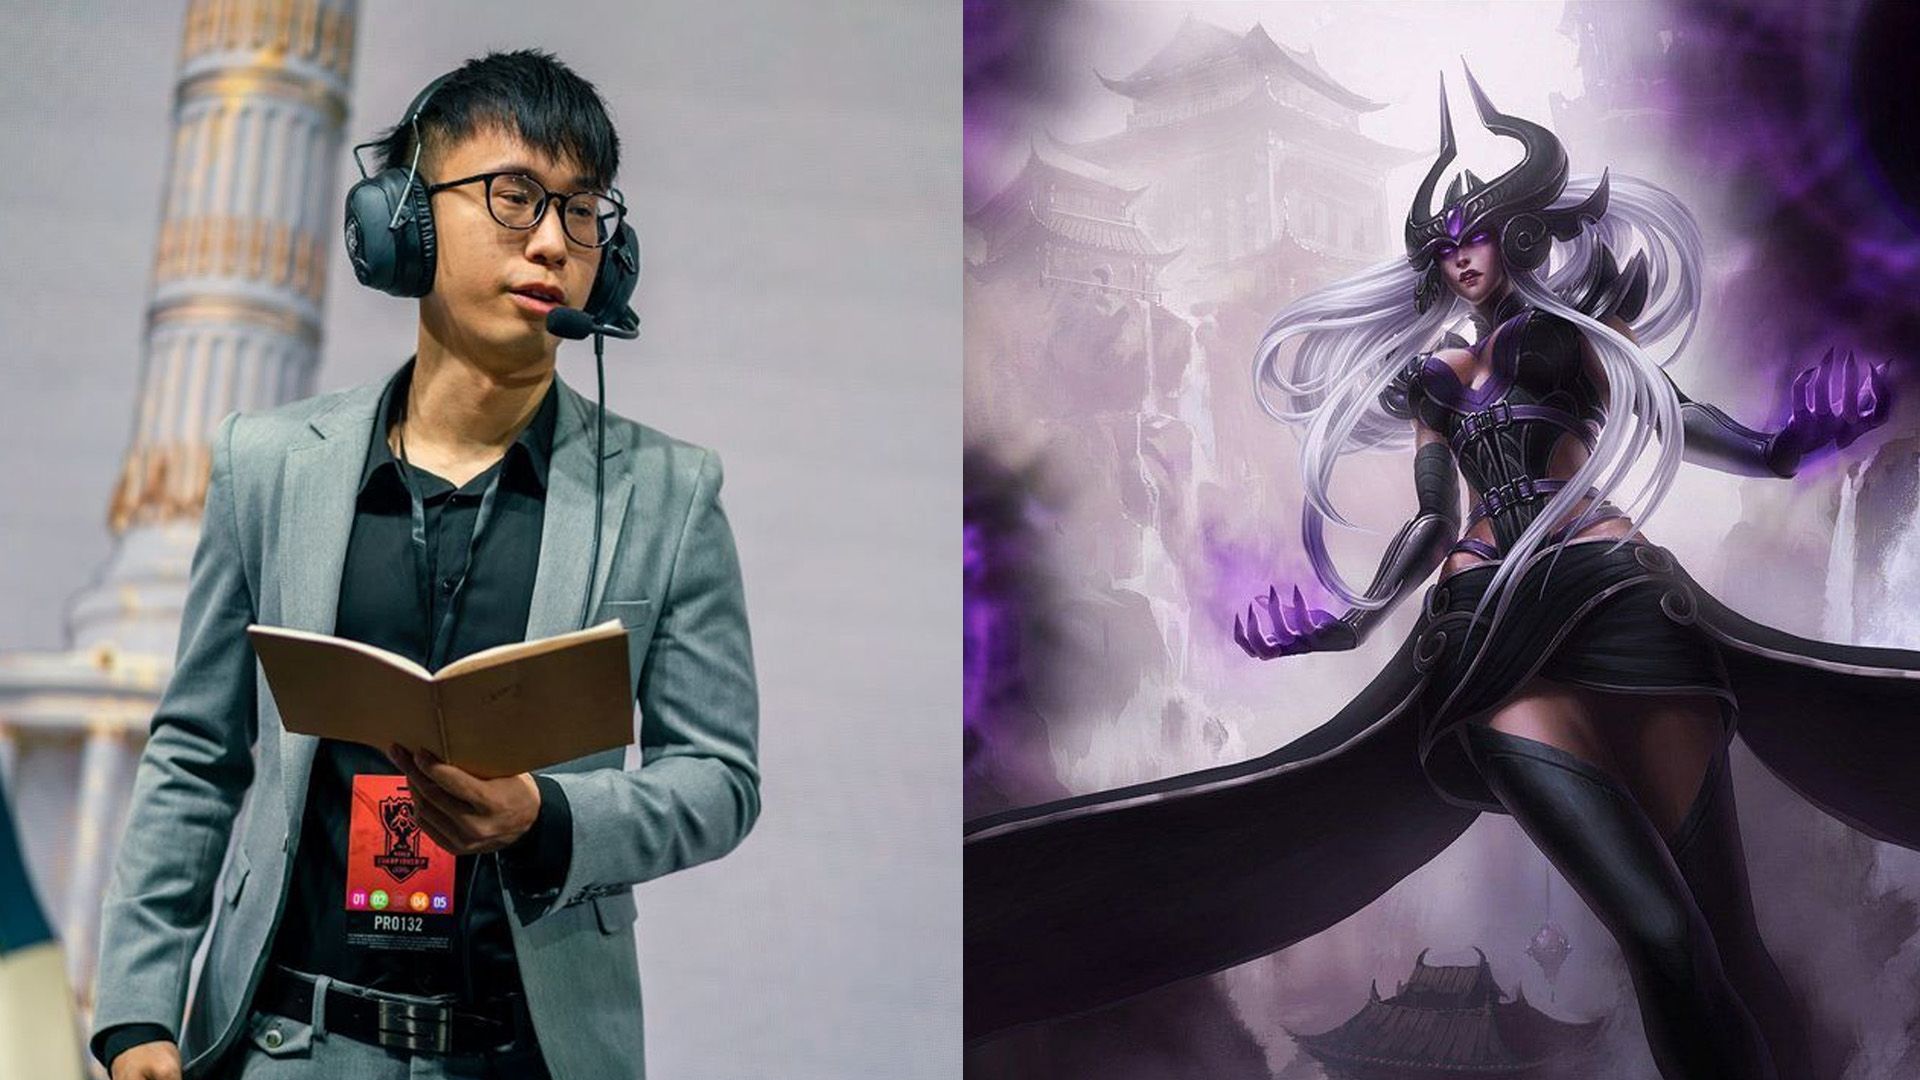 Personlig Sammensætning halvø 5 pro tips to stun enemies with Syndra by Chawy | ONE Esports